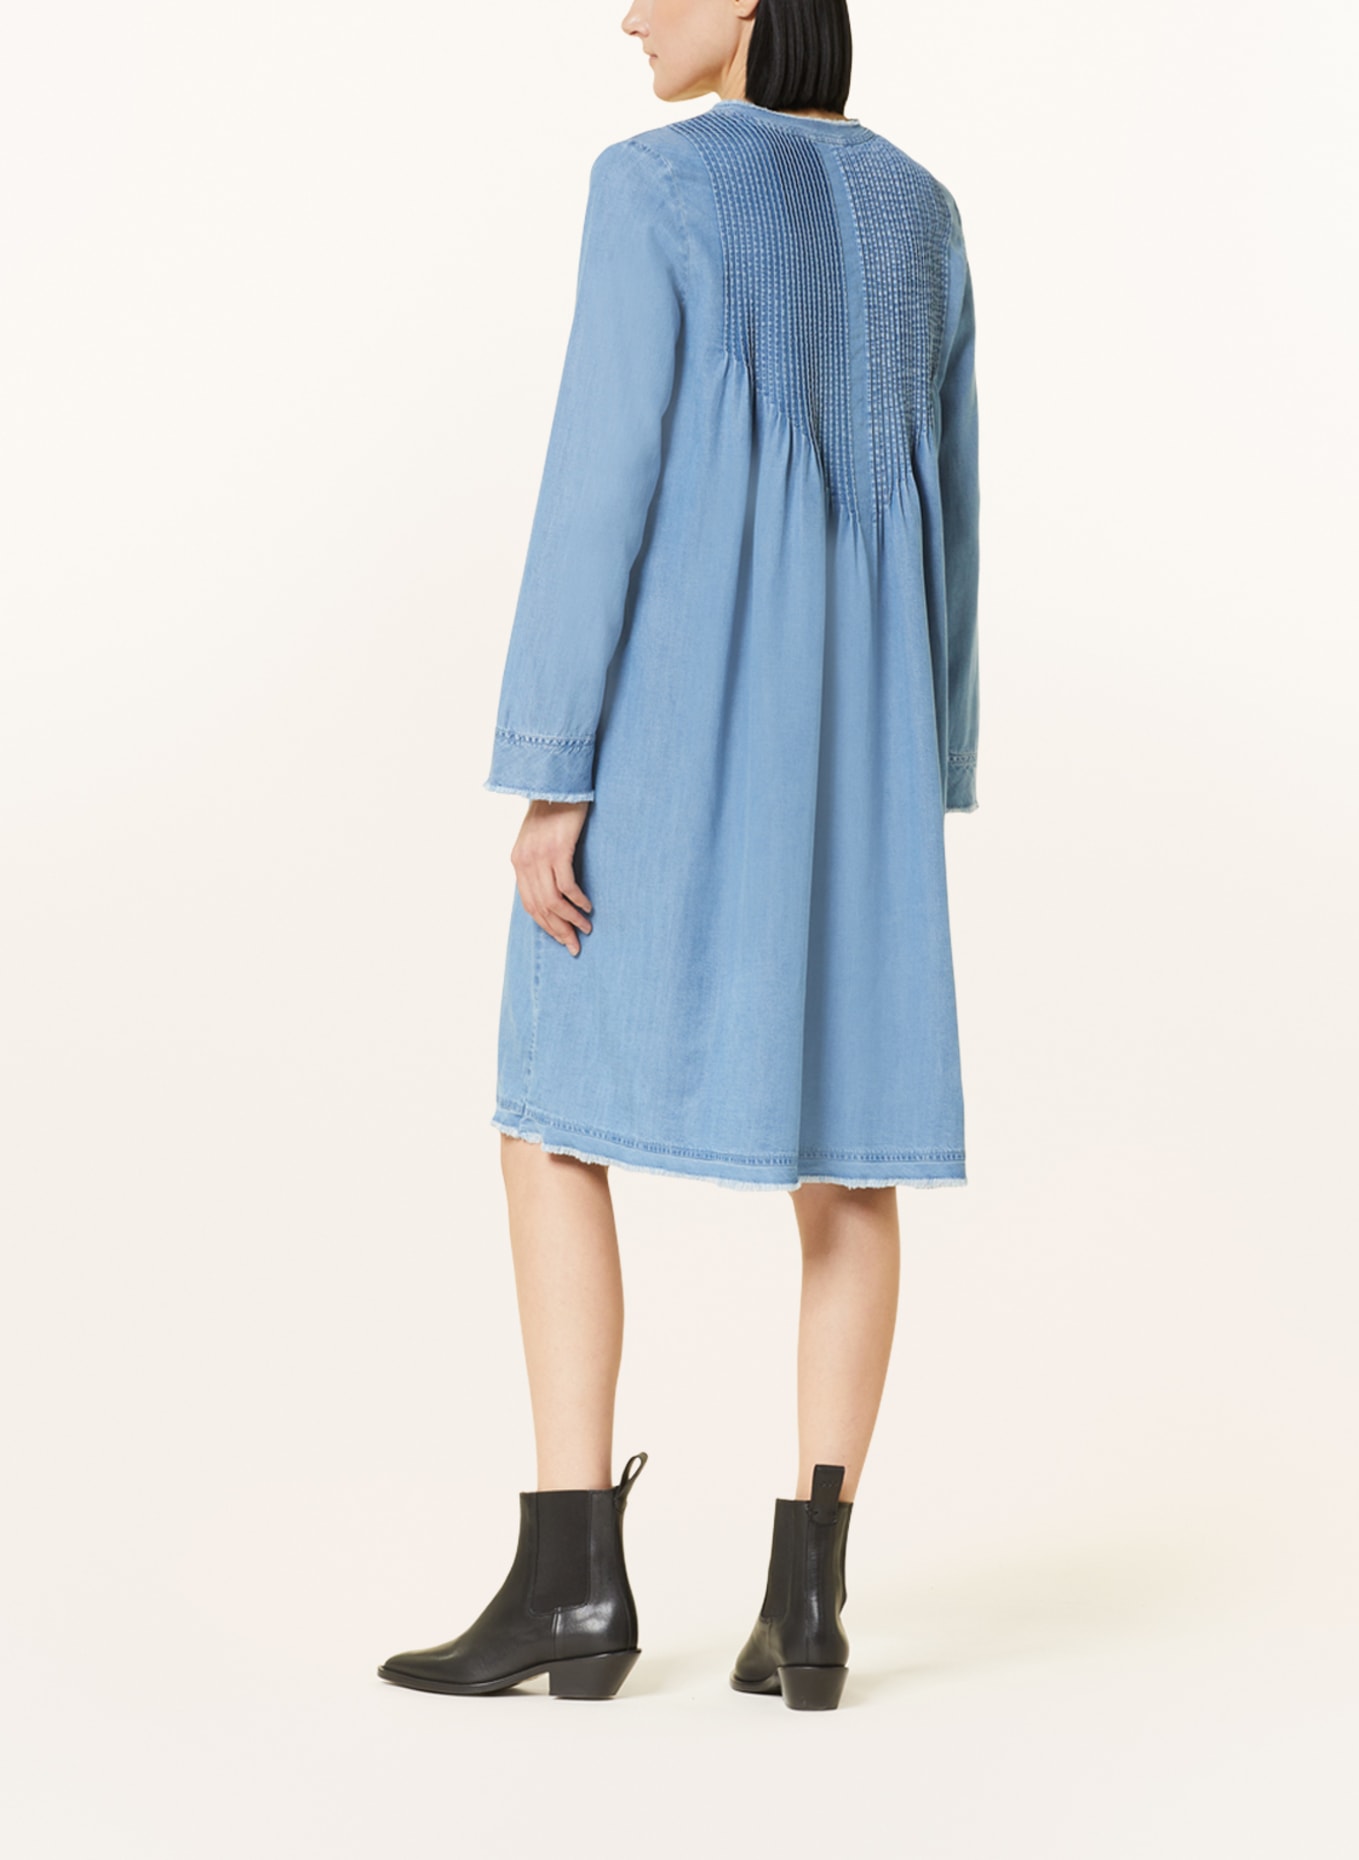 MARC CAIN Dress in denim look with fringes, Color: BLUE (Image 3)